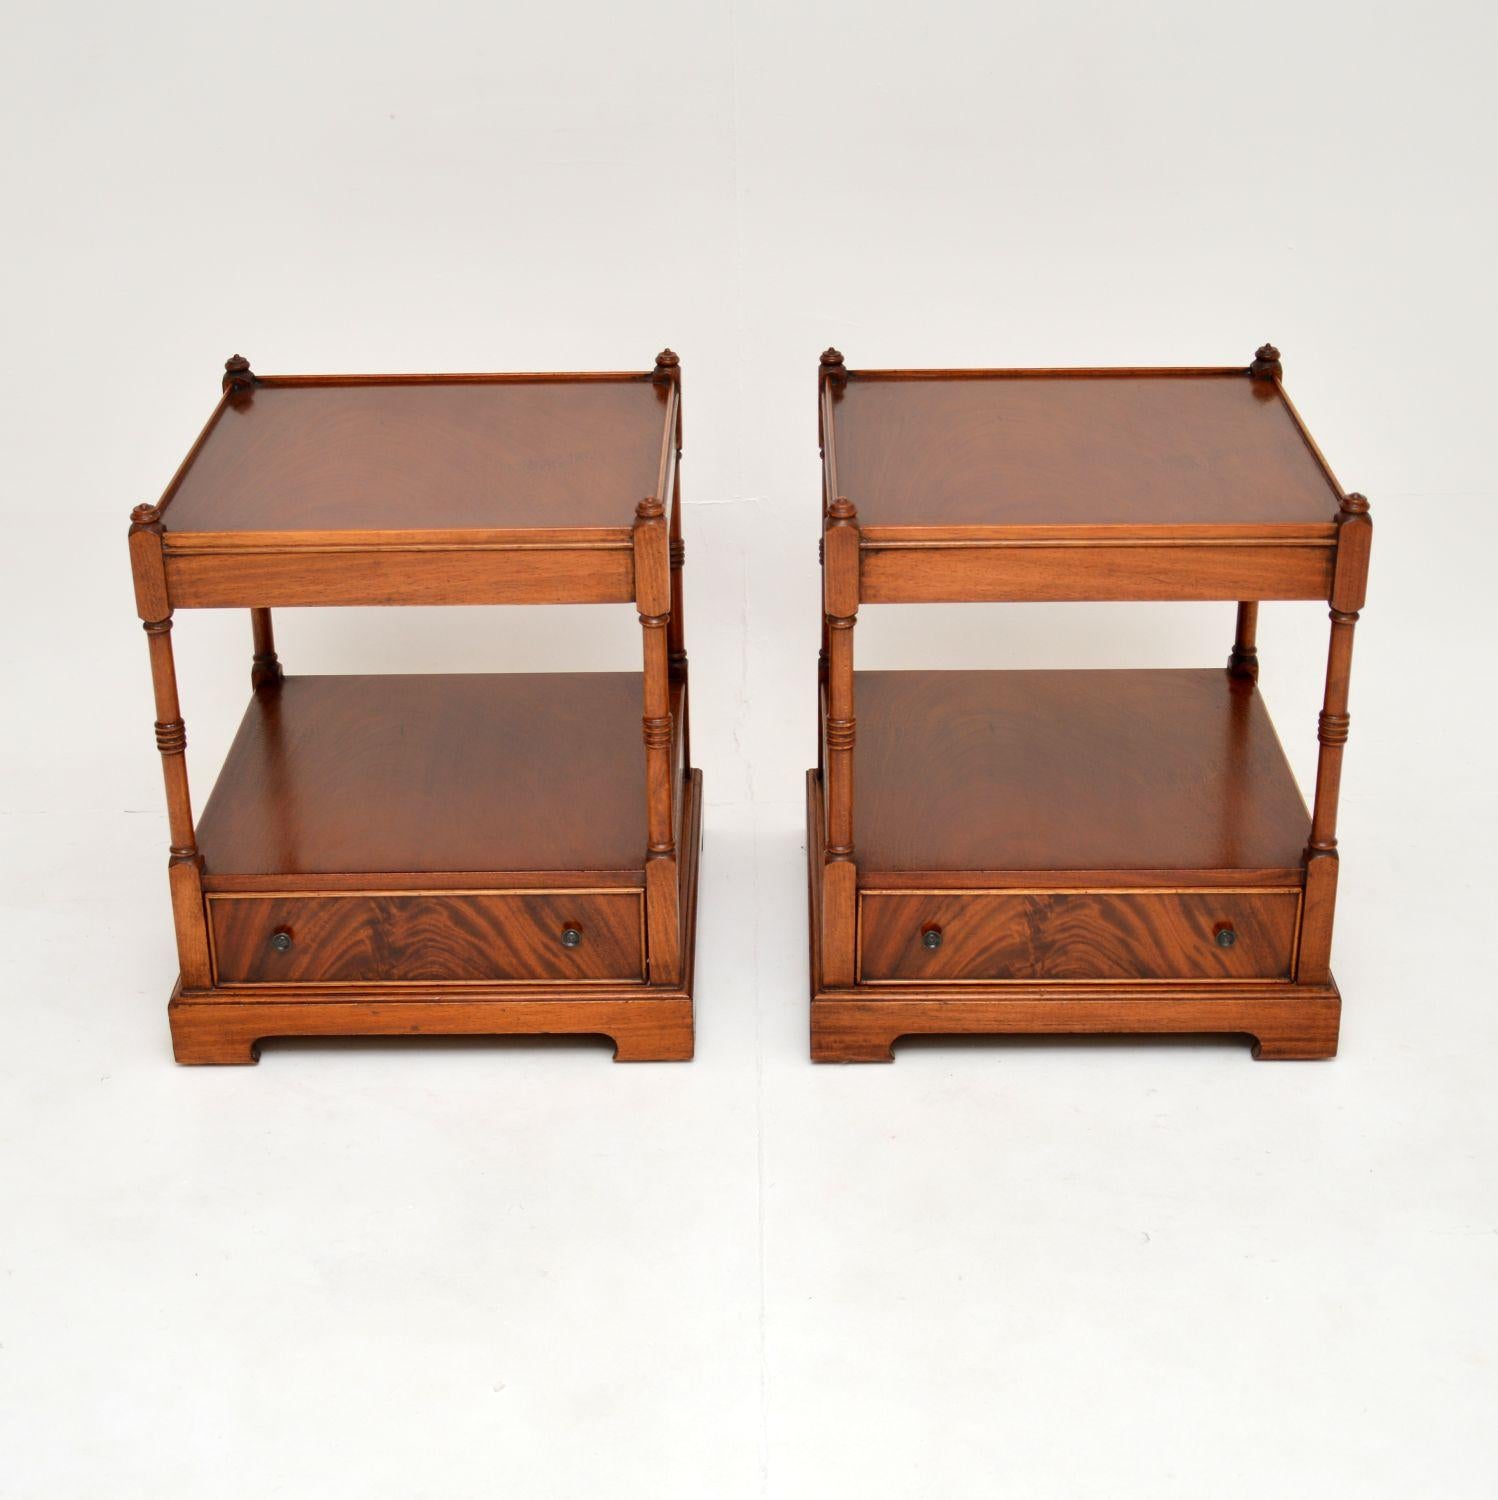 A smart and very well made pair of antique side tables in the Georgian style. They were made in England, they date from around the 1930’s.

The quality is excellent, they have two useful tiers with a drawer in the lower section. They are nicely